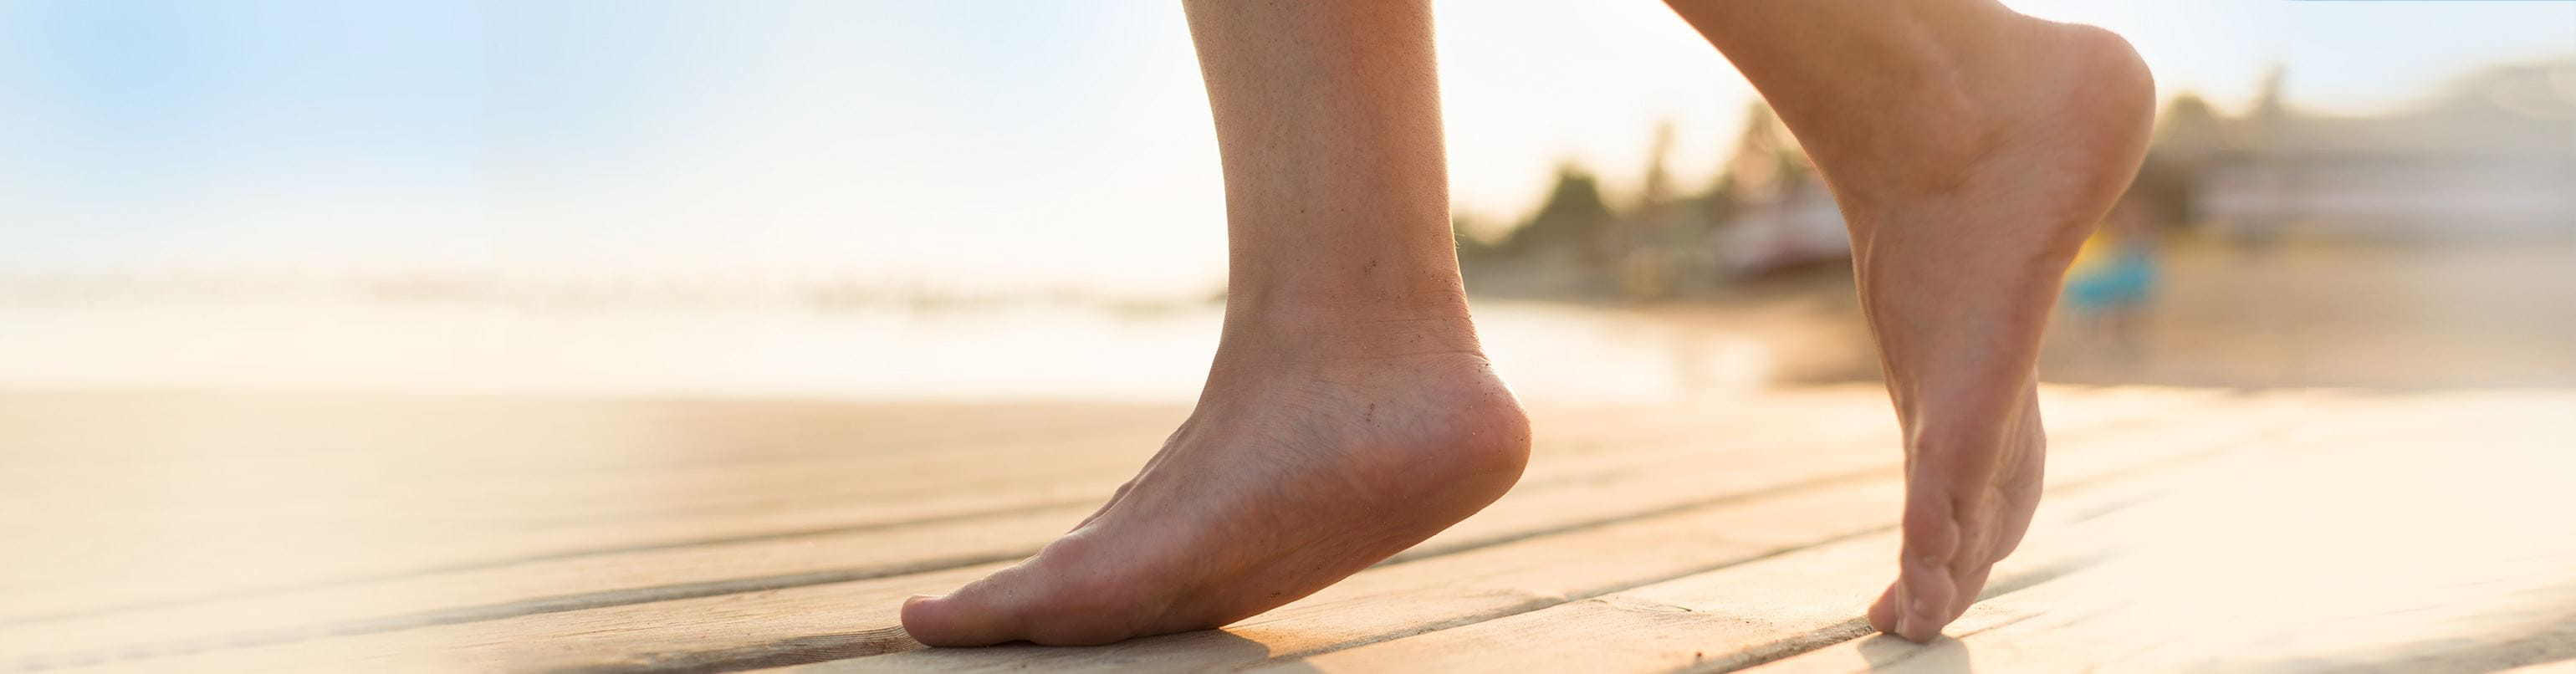 5 Reasons Why You Keep Getting Calluses on Feet | Elizabeth E. Auger, DPM